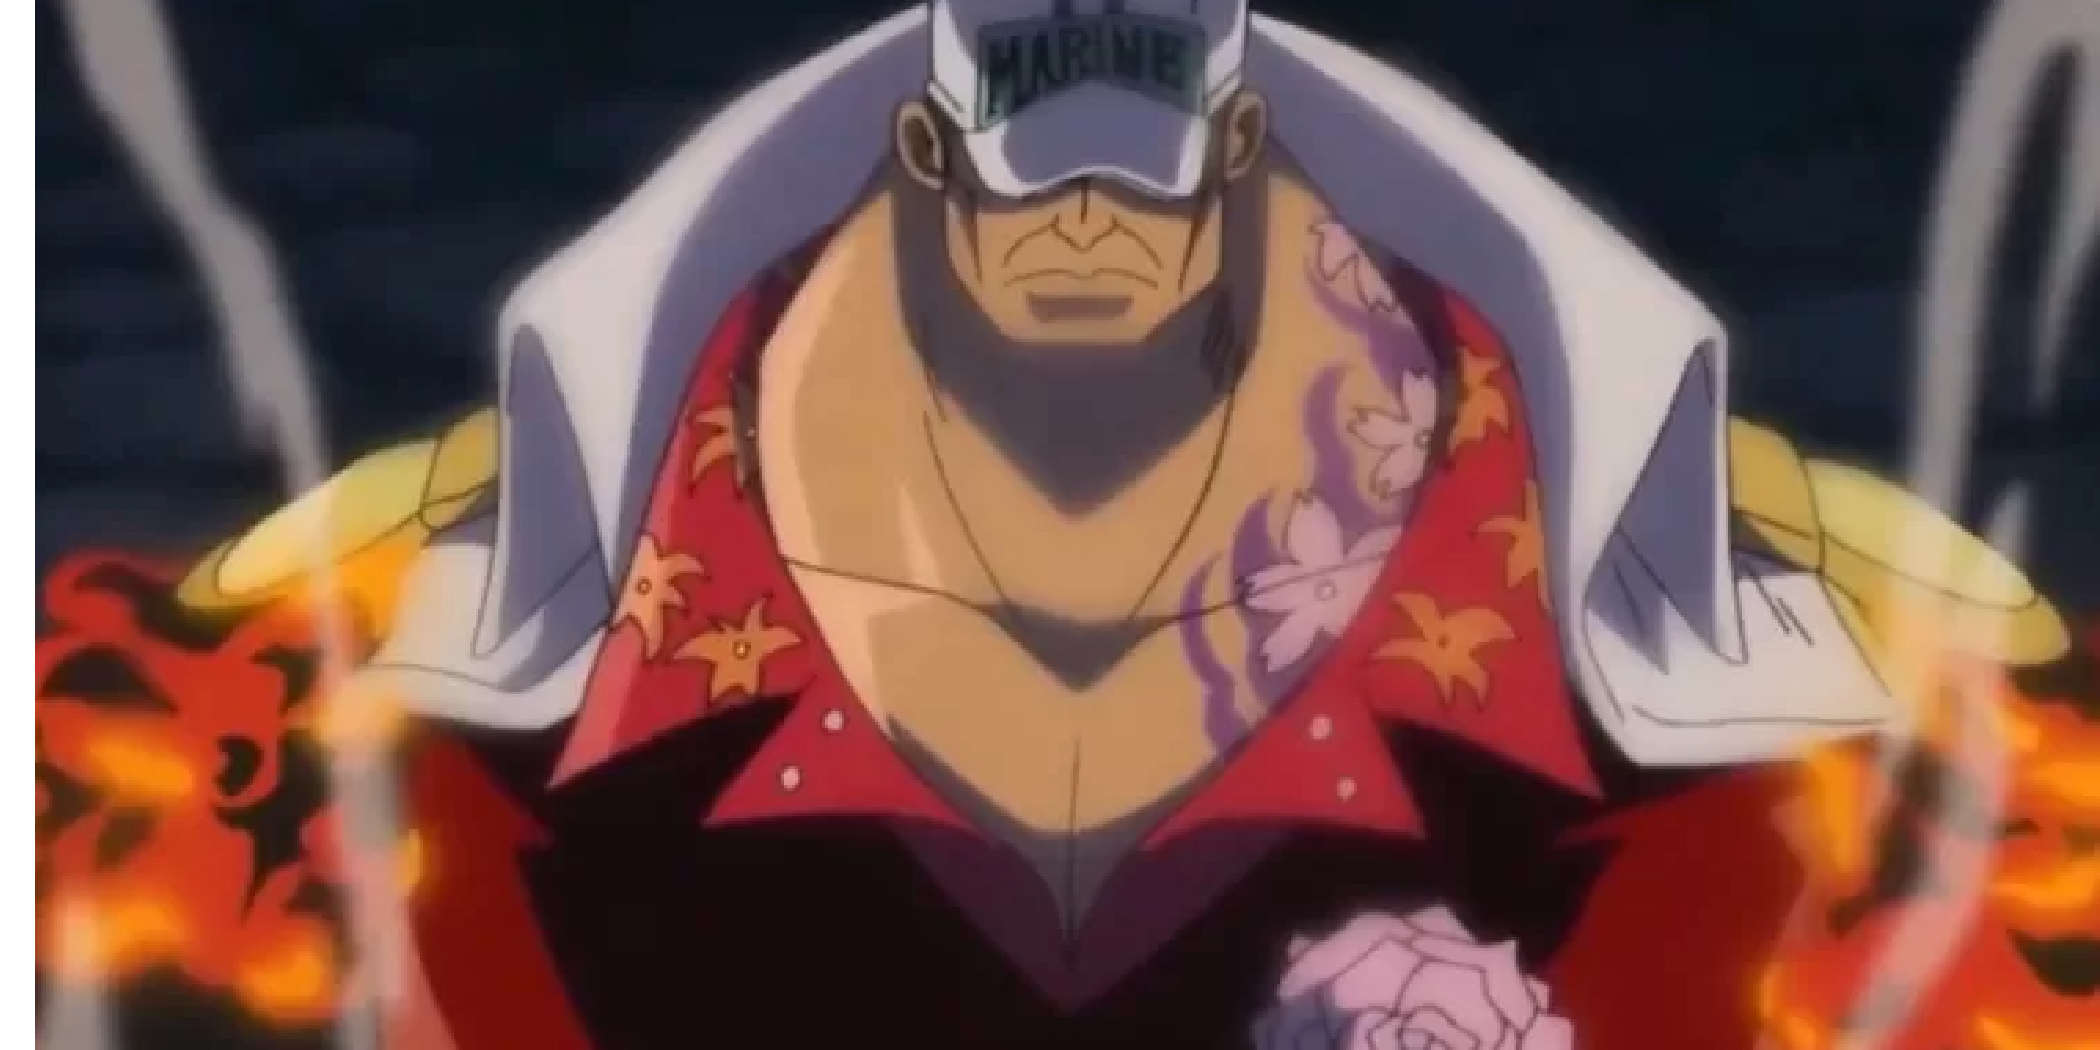 Front view of Akainu in his magma form